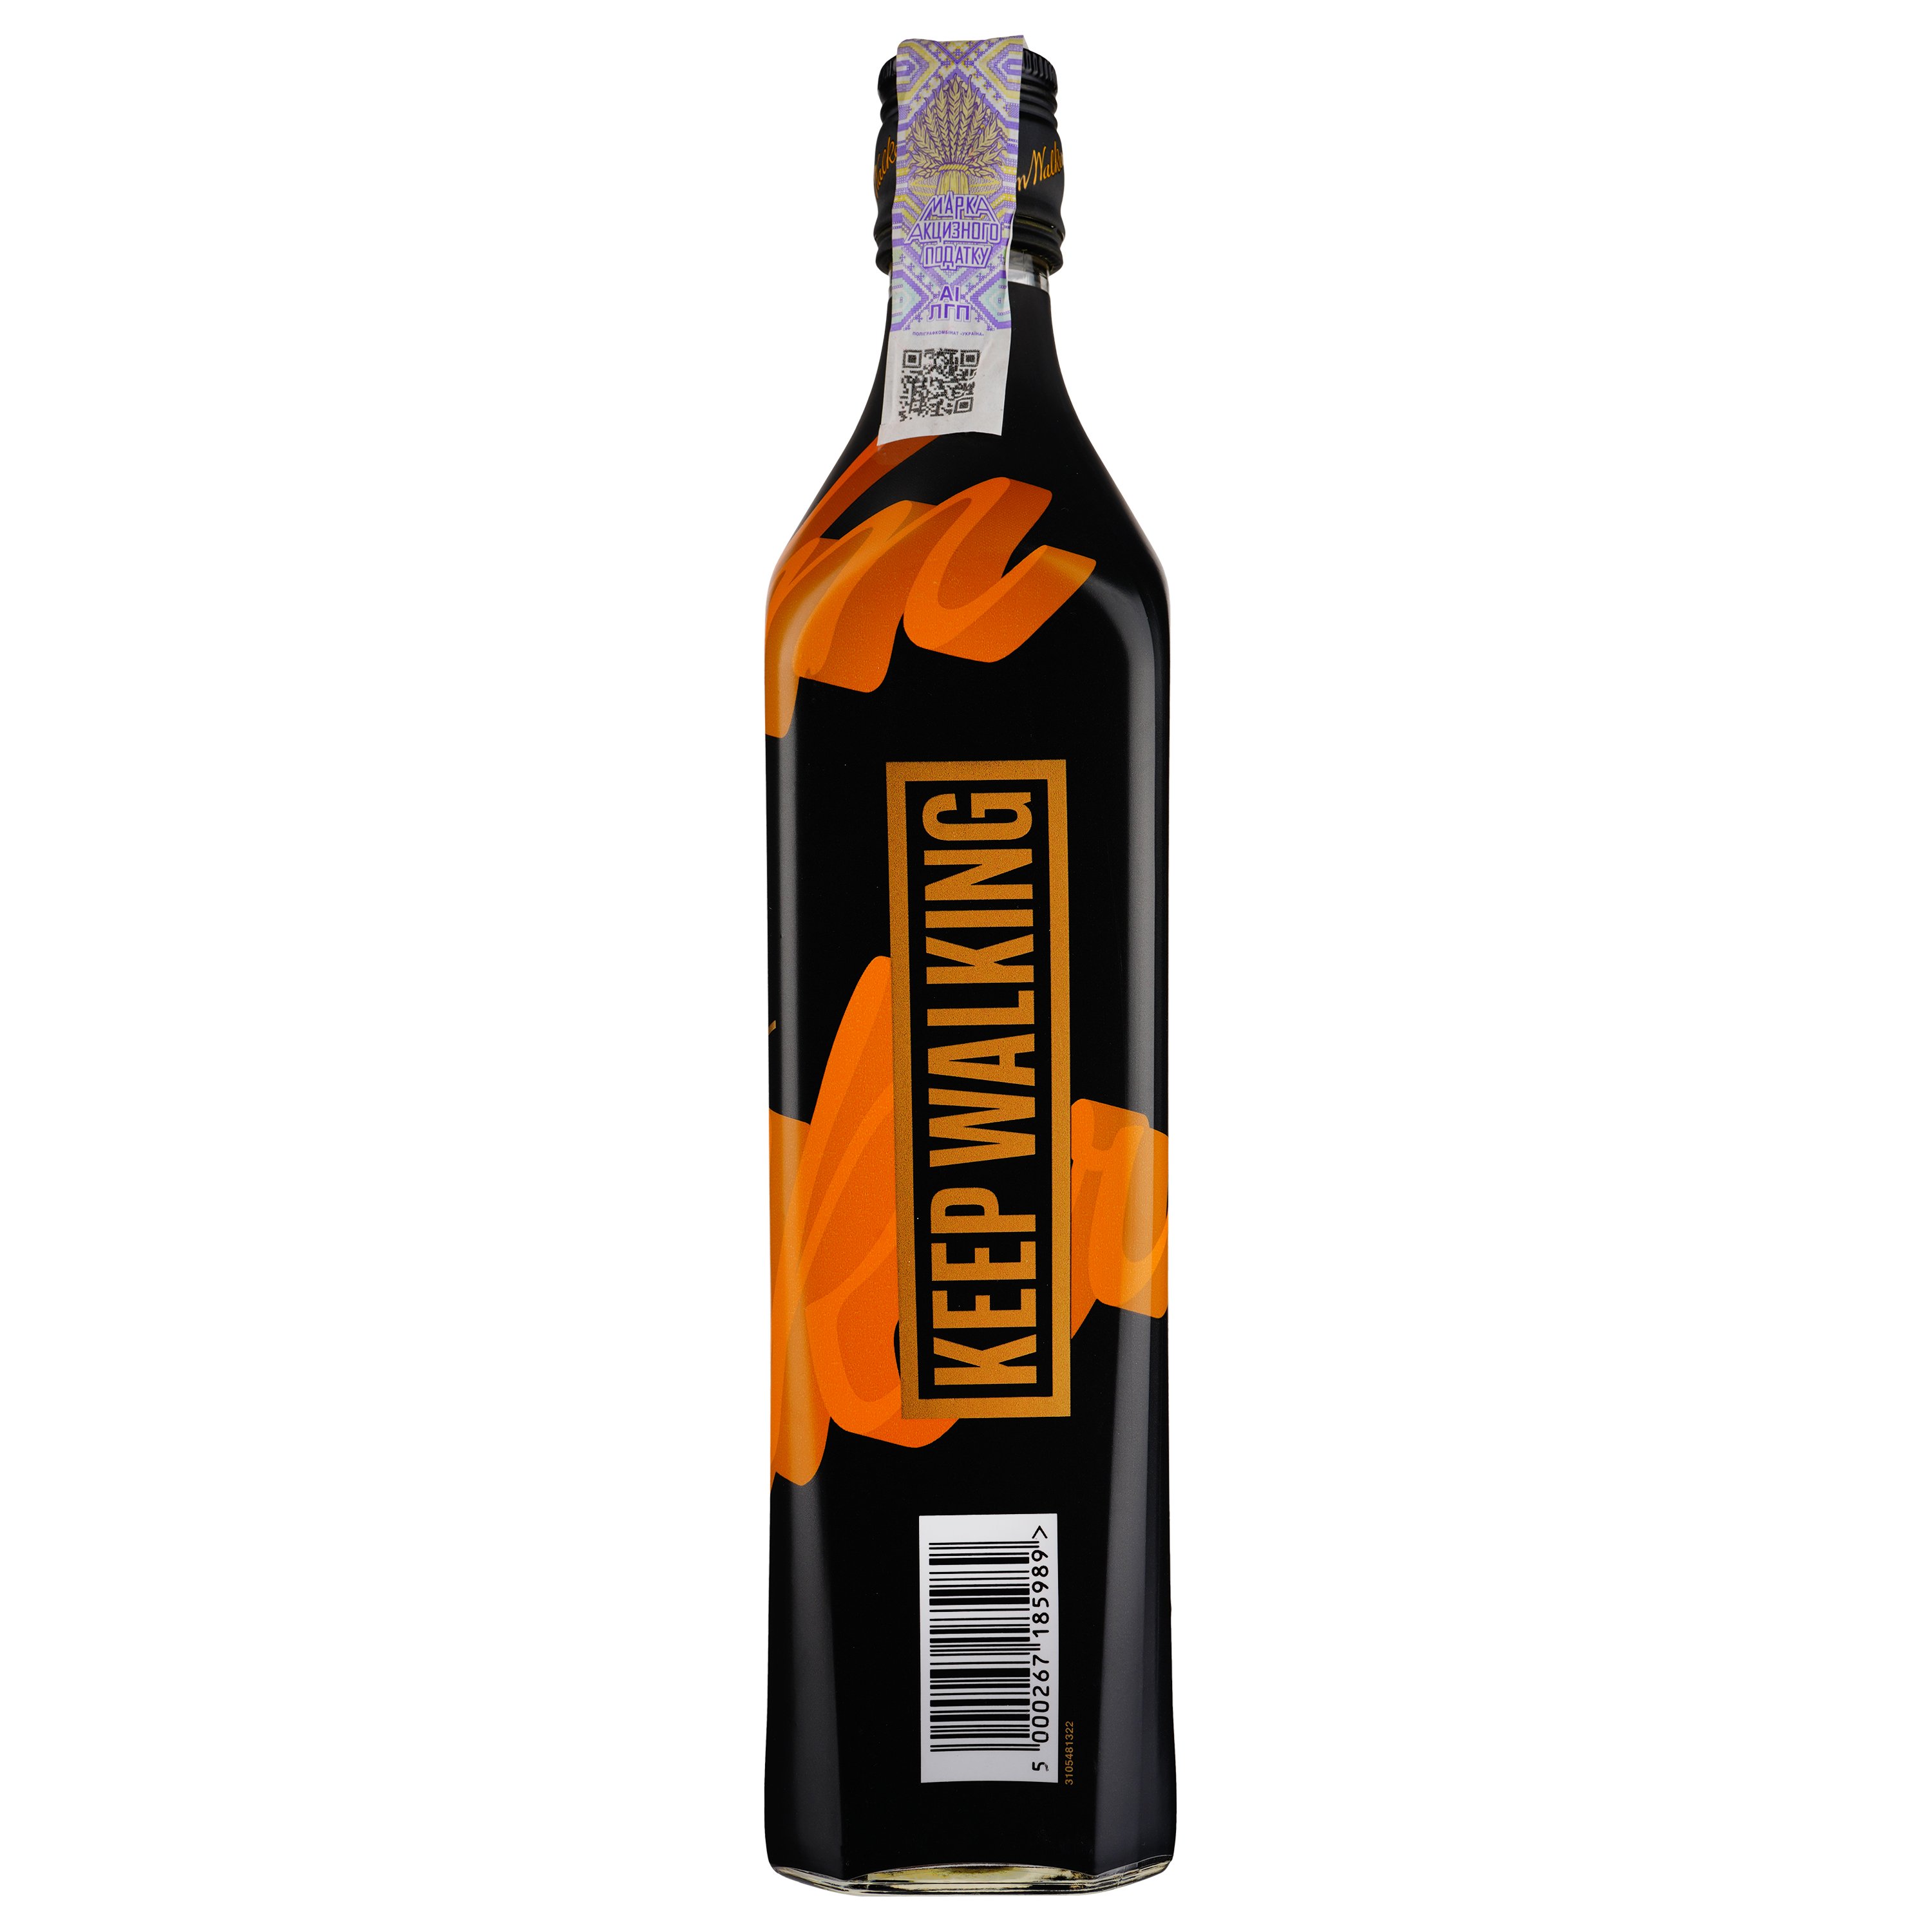 Виски Johnnie Walker Black label Icon Blended Scotch Whisky, 40%, 0,7 л - фото 3